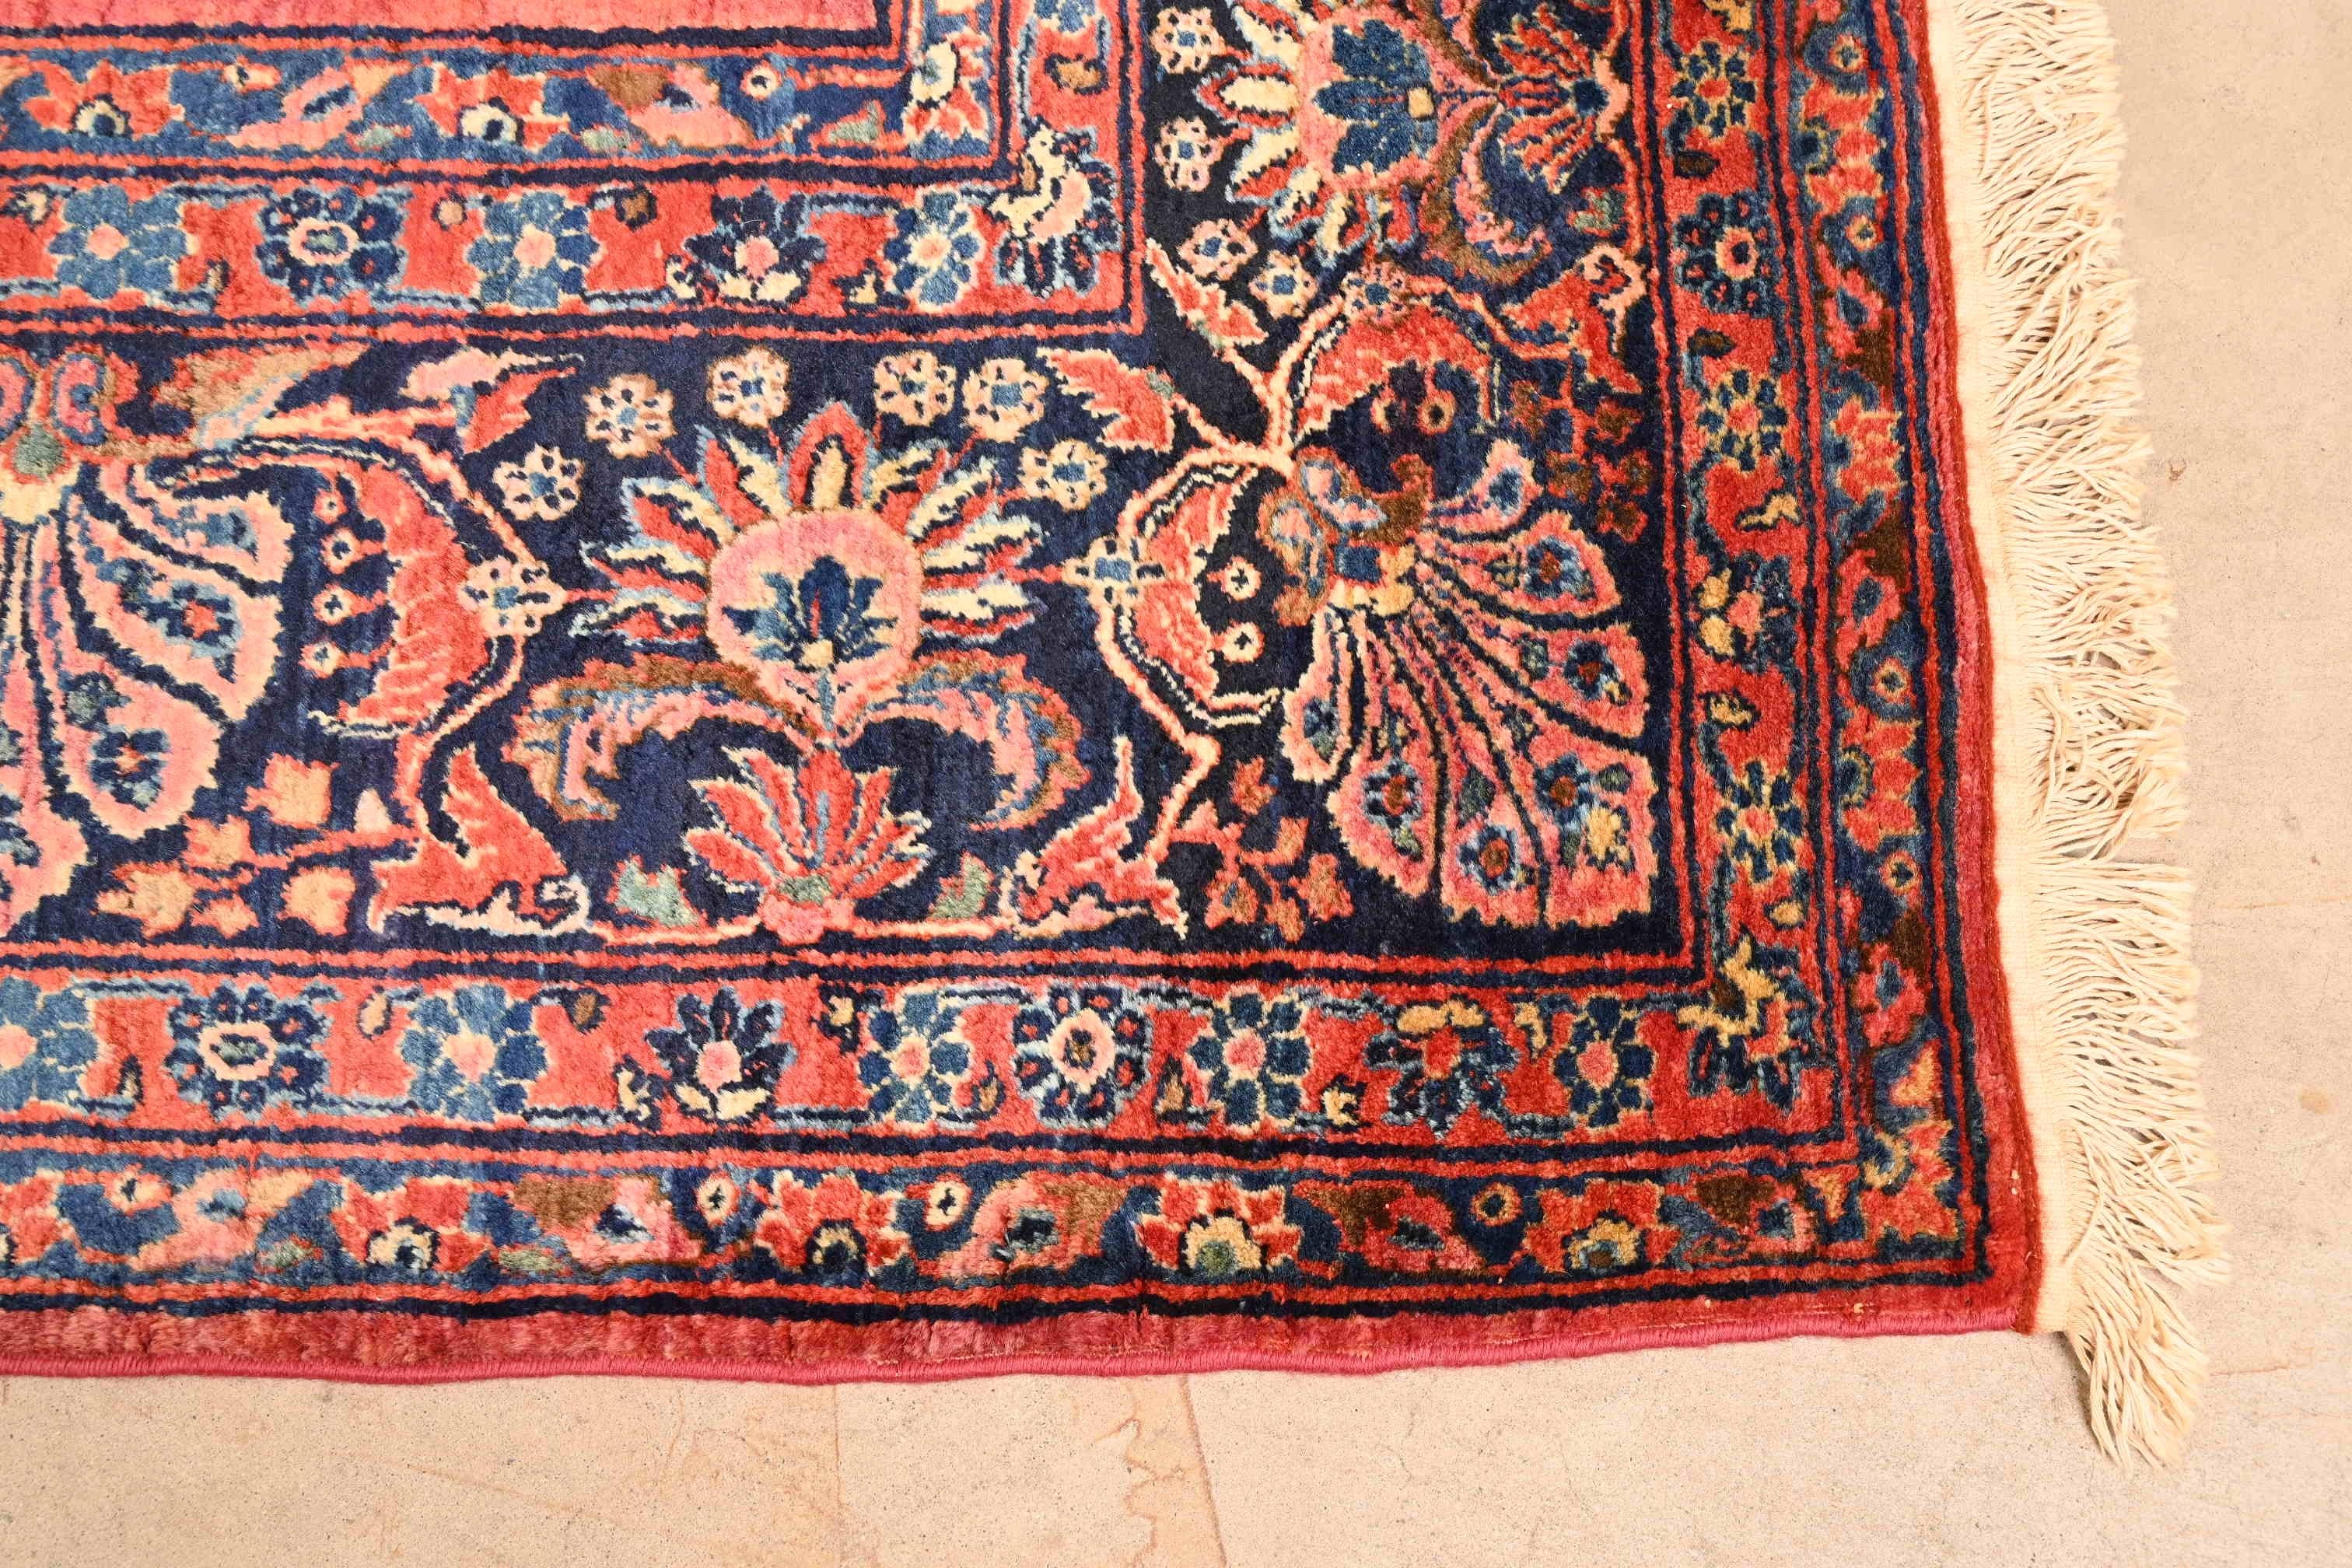 Wool Antique Hand-Knotted Persian Sarouk Room Size Rug, Circa 1930s For Sale